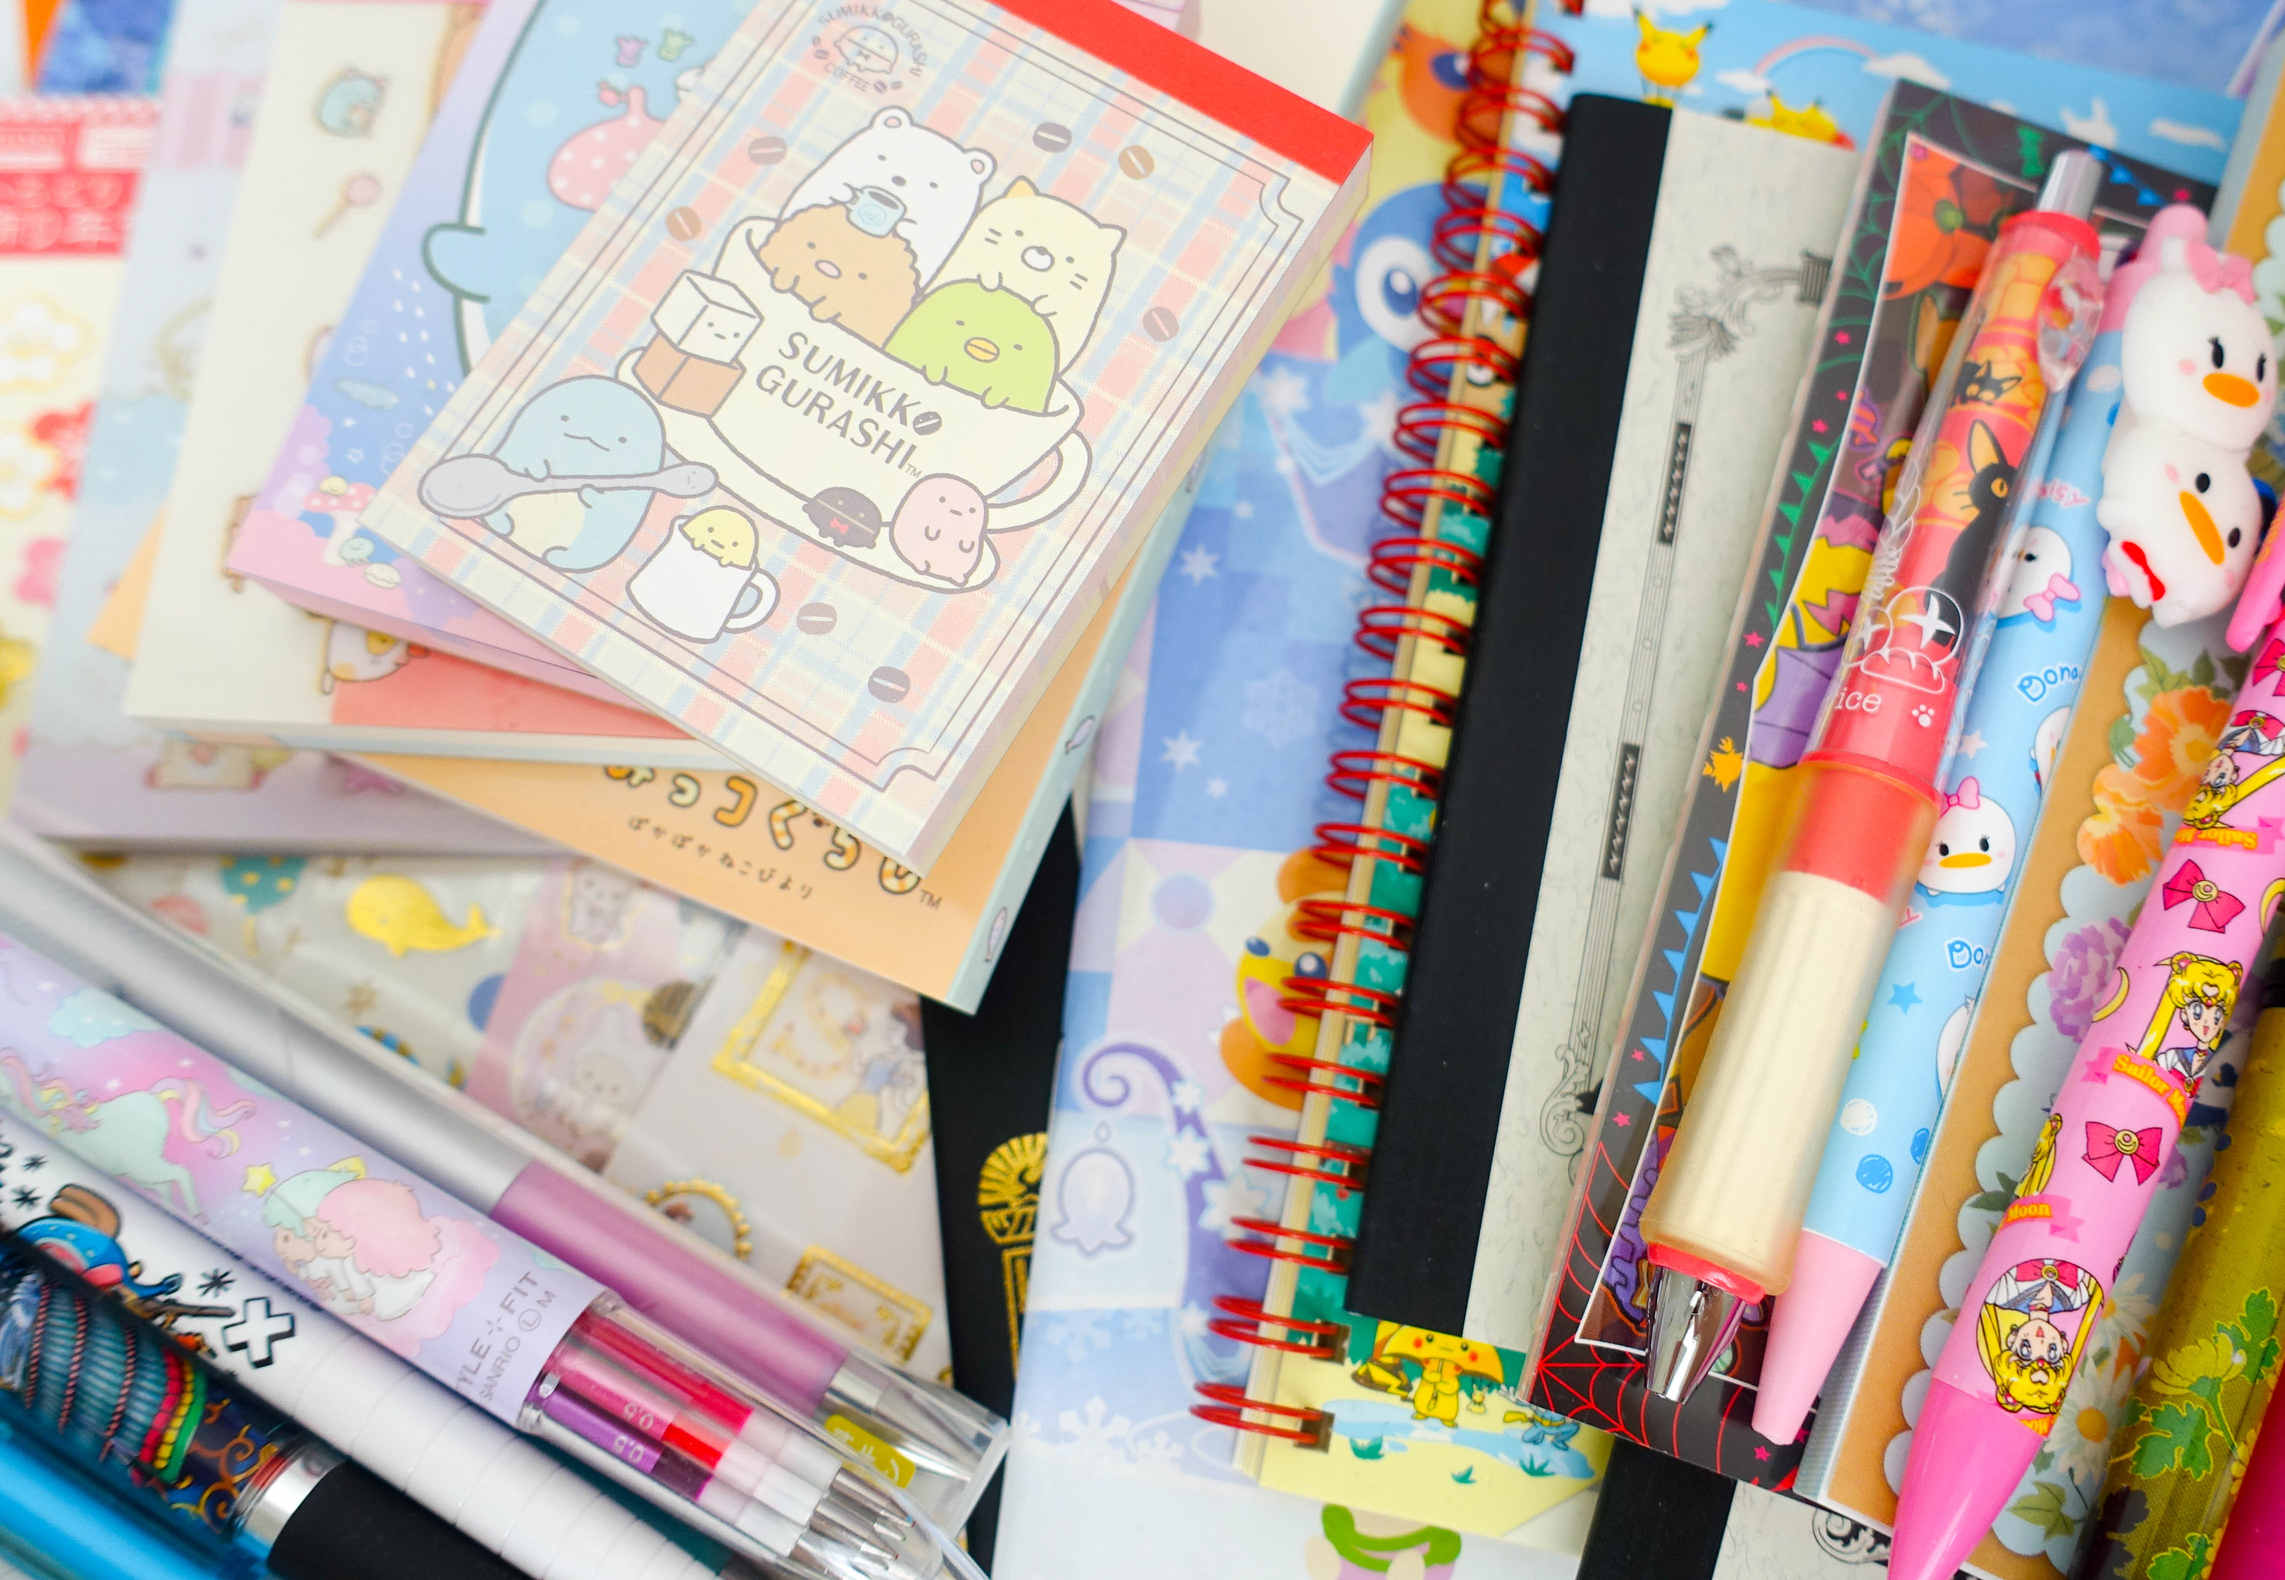 Daiso 100 Yen Haul: Top 5 Crazy Quality Japanese Stationery on a